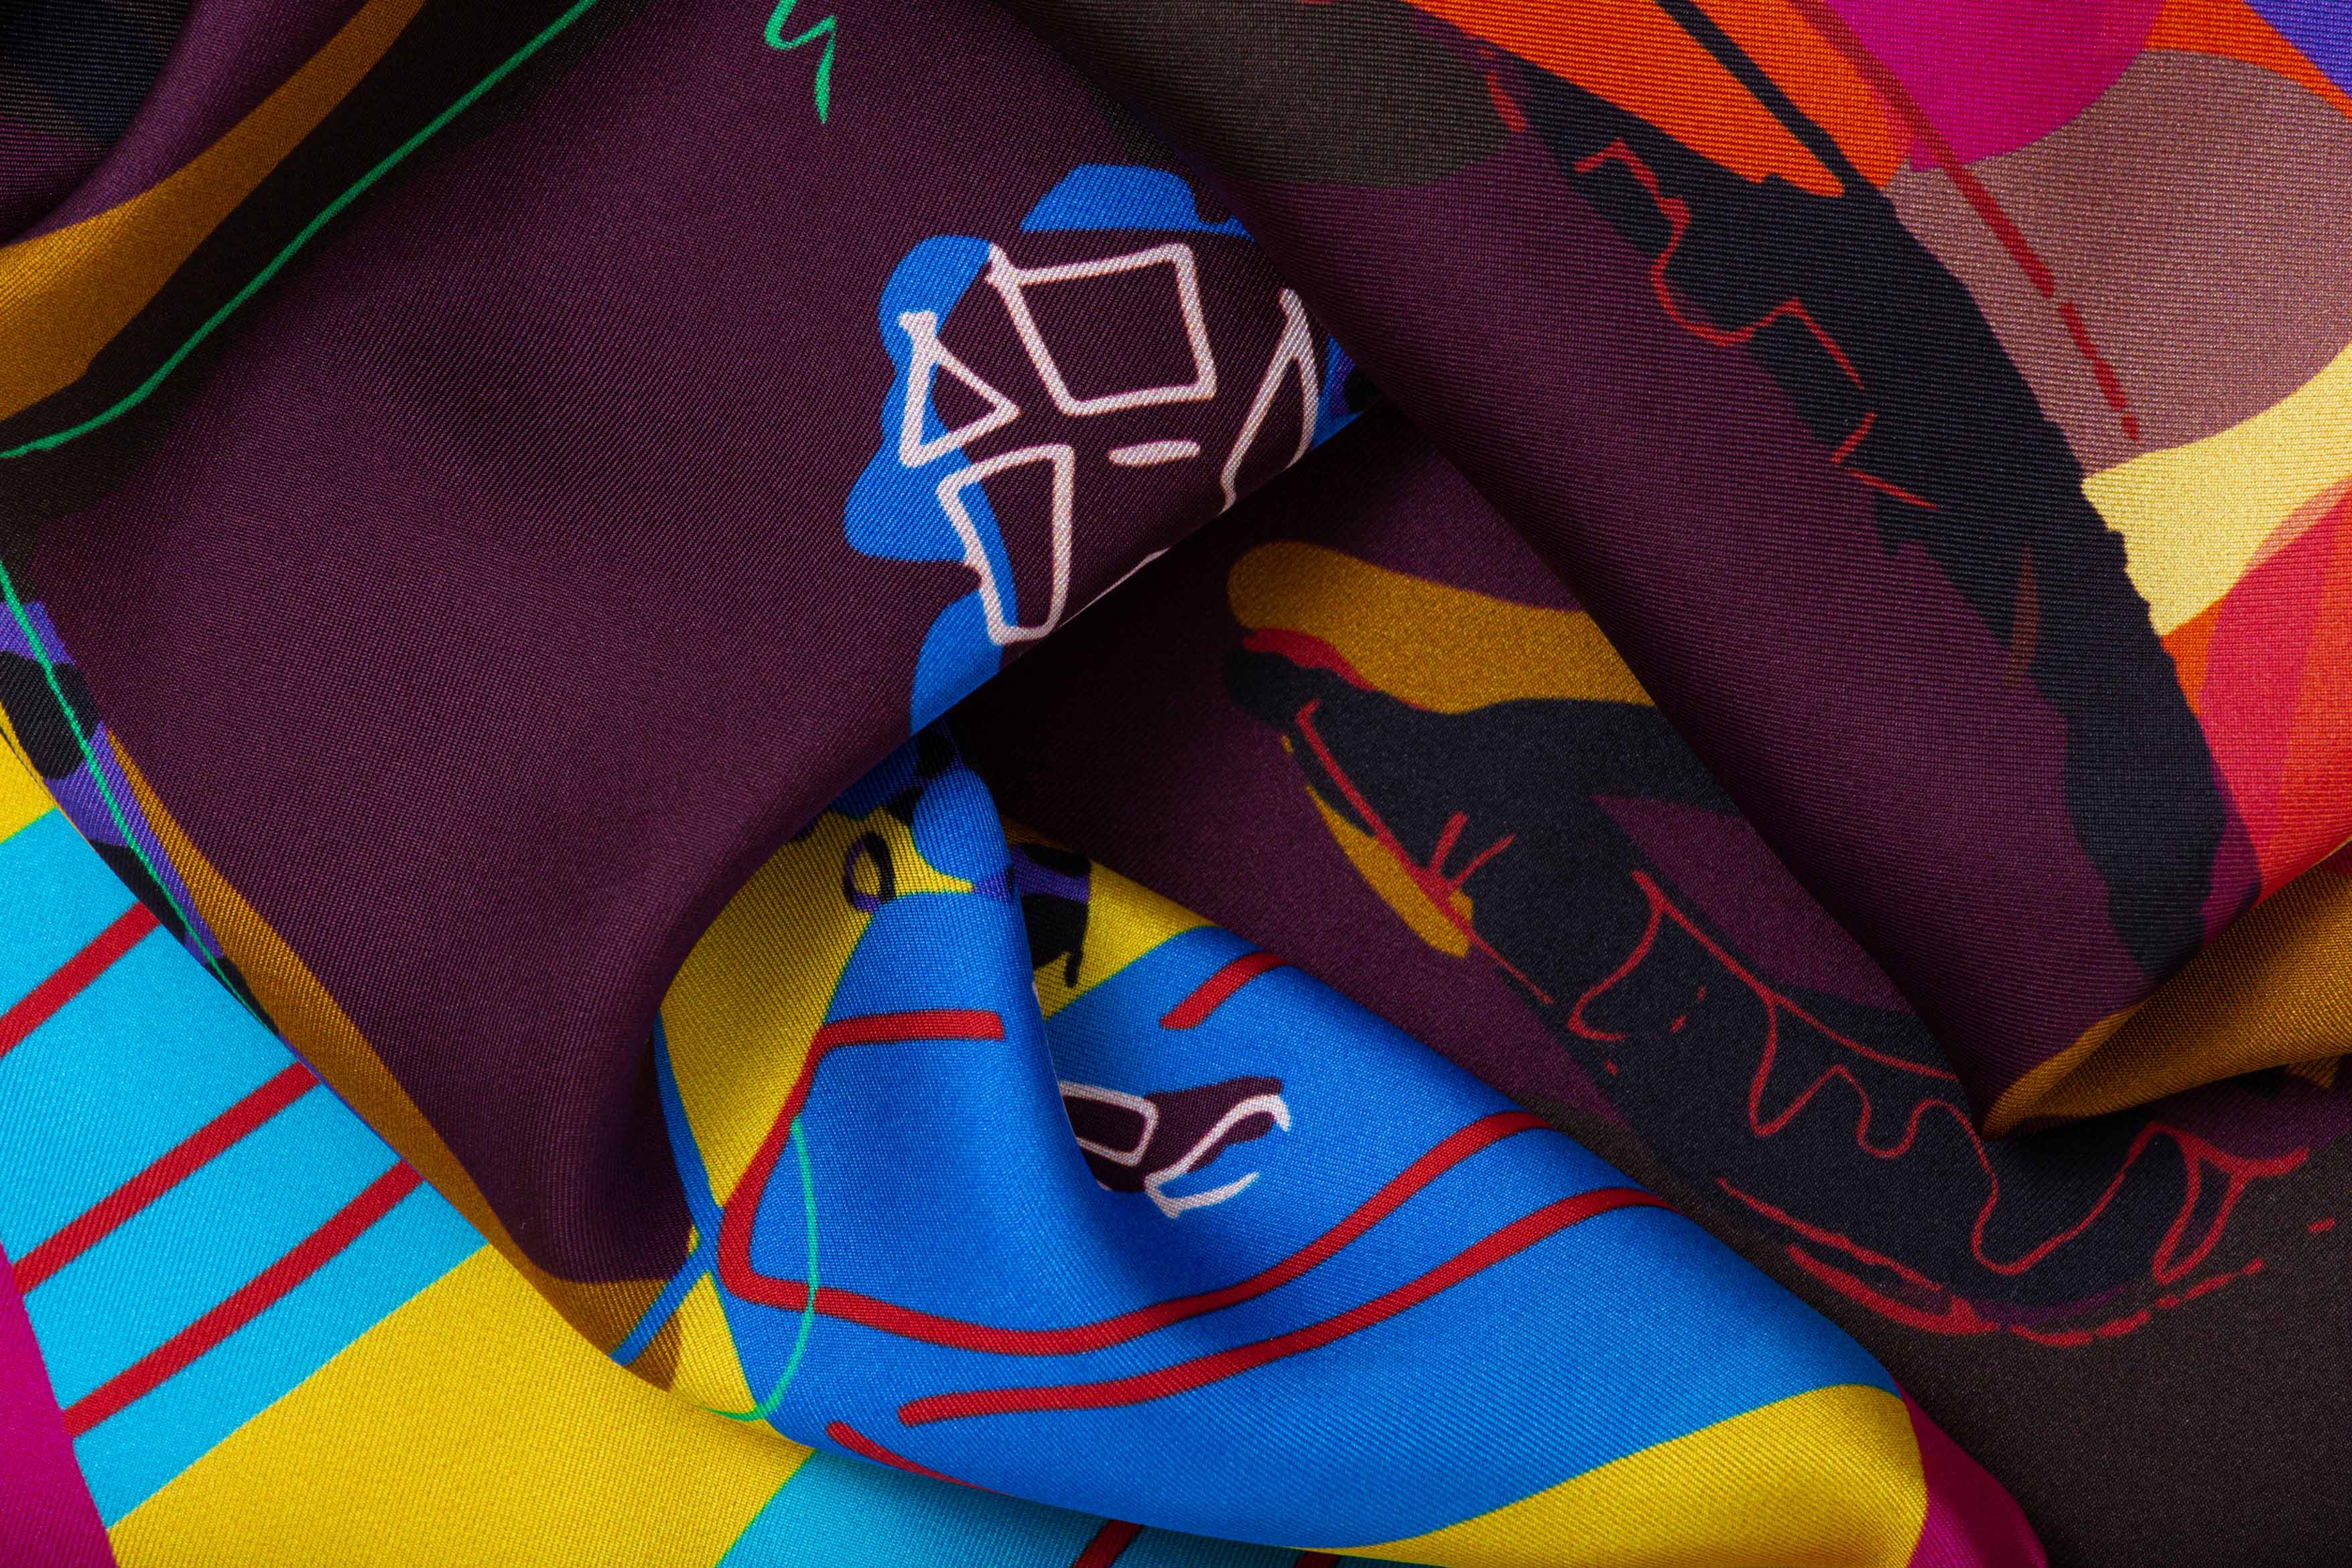 Close-up image of 100% silk square scarf featuring the artist’s portrait of Nina Simone surrounded by bold geometric shapes and featuring such colors as tangerine, citrus yellow, bright blue, burgundy and deep mahogany.